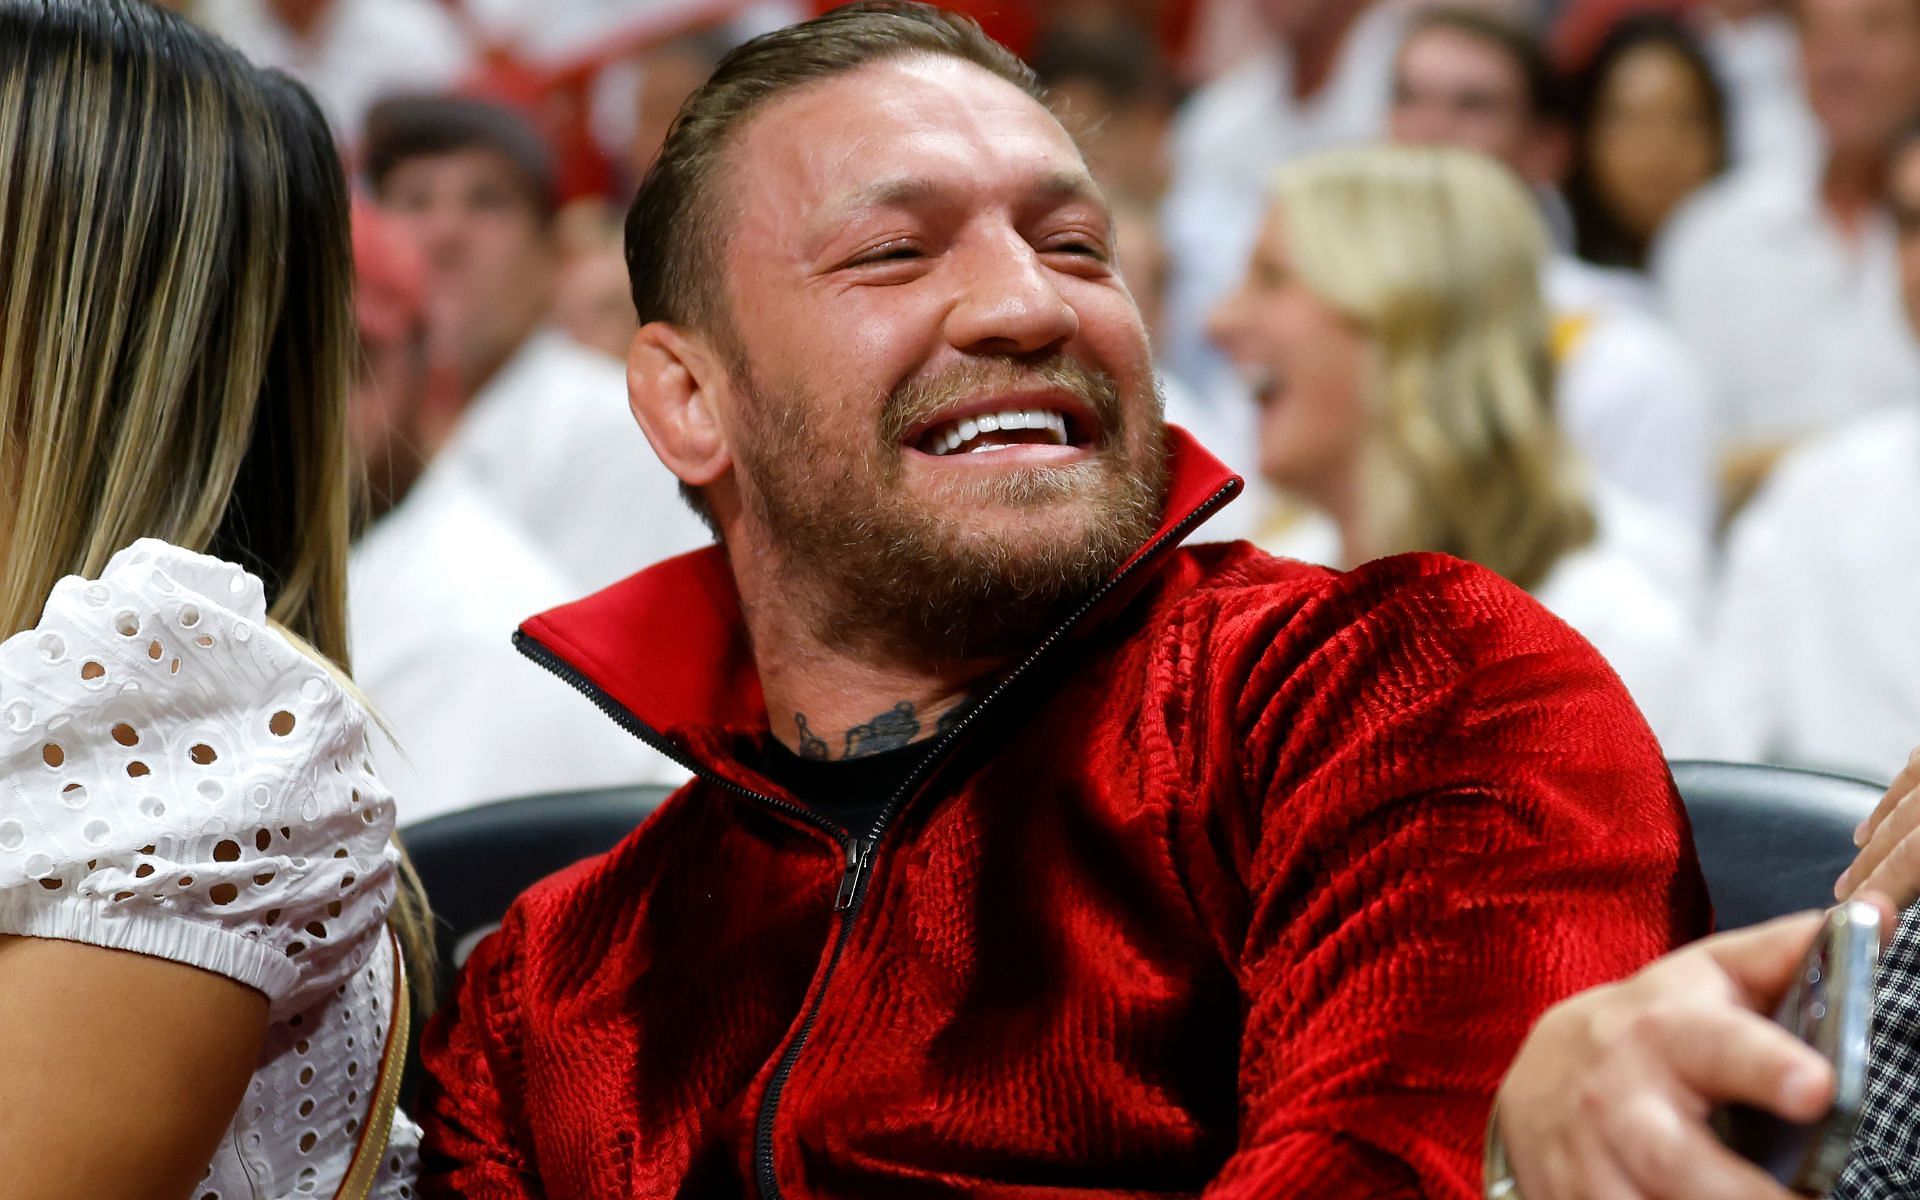 Conor McGregor at the NBA Finals Game 4 [Image courtesy: Getty]